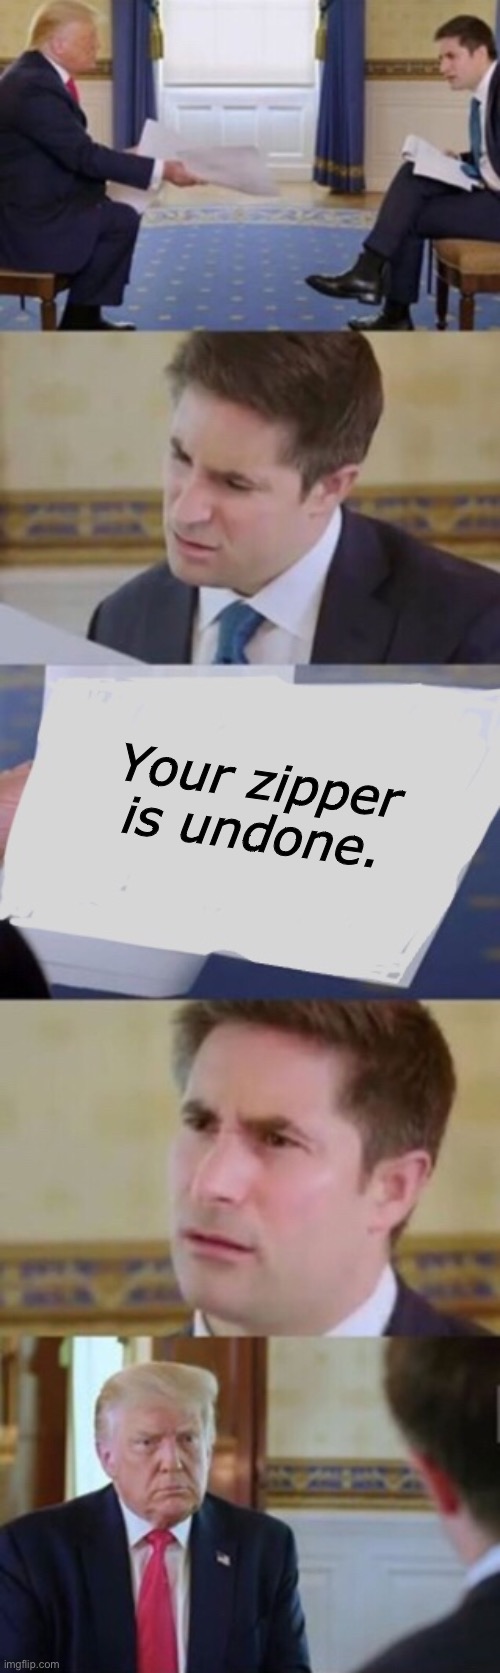 Trump interview |  Your zipper is undone. | image tagged in trump interview | made w/ Imgflip meme maker